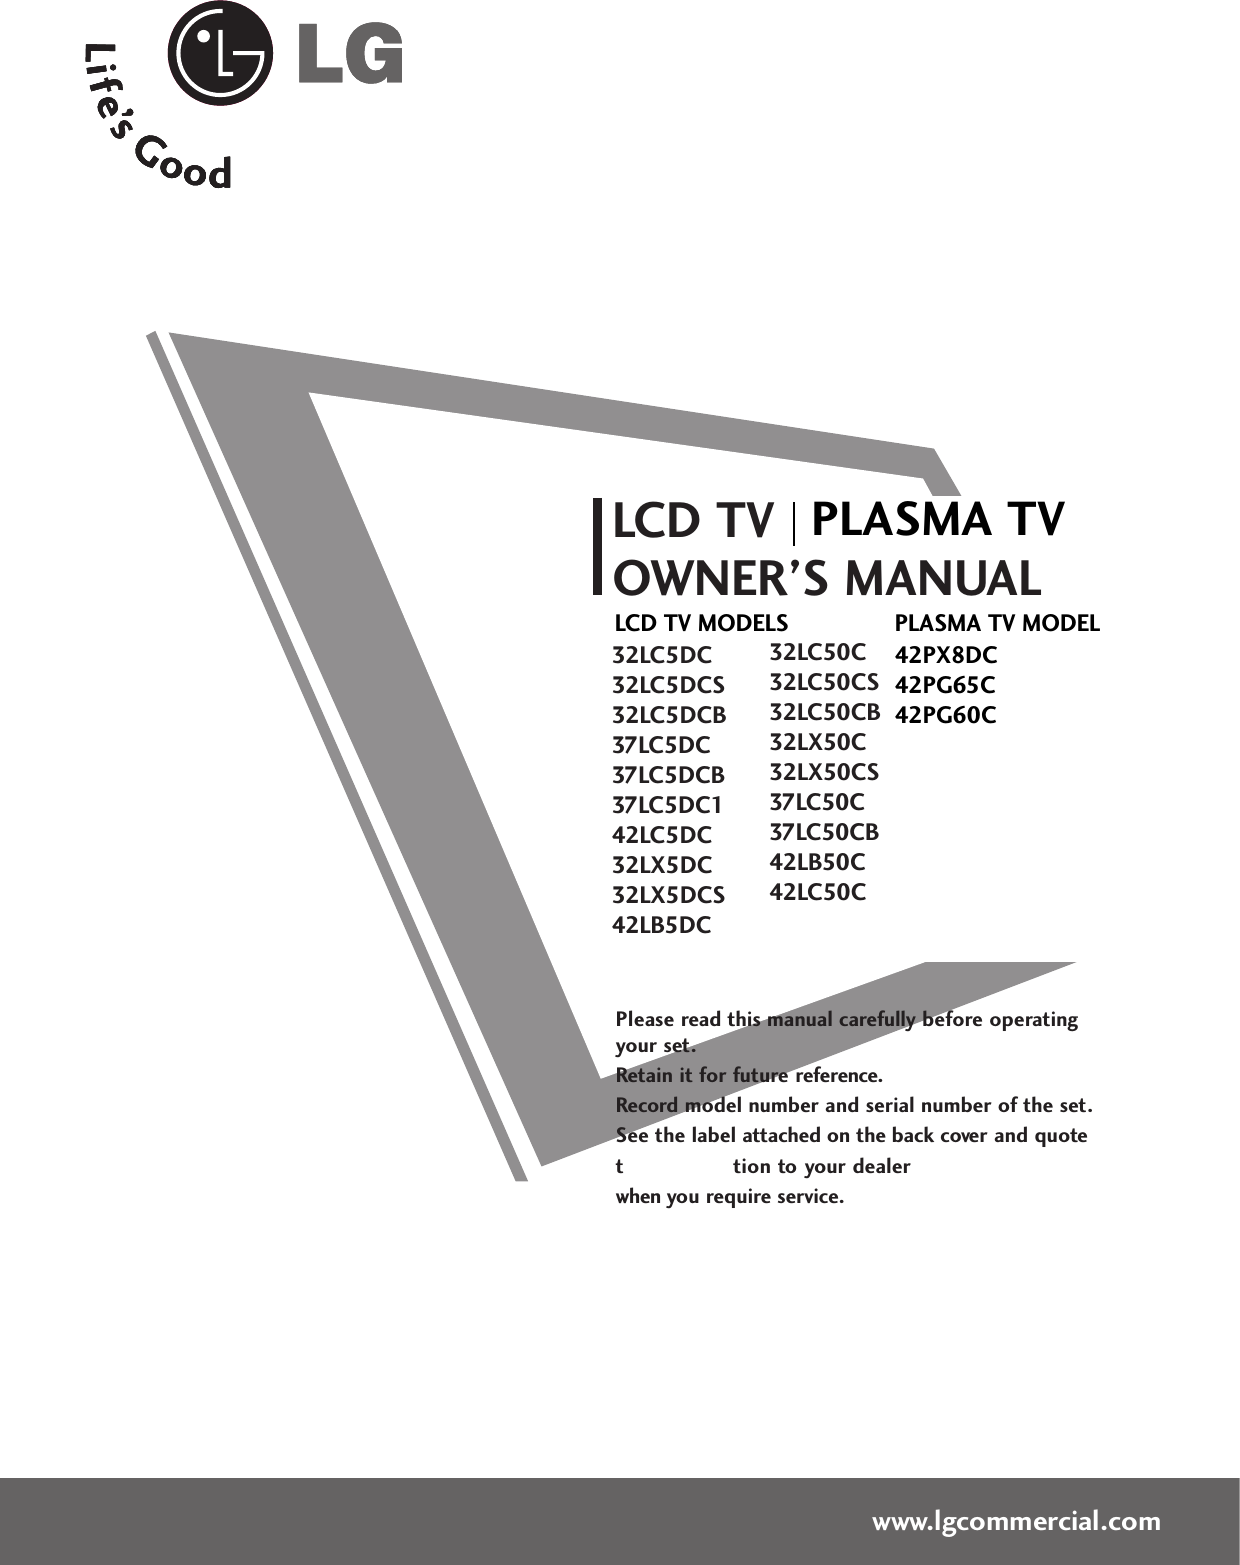 Please read this manual carefully before operatingyour set. Retain it for future reference.Record model number and serial number of the set. See the label attached on the back cover and quote this  informa tion to your dealer when you require service.LCD TVOWNER’S MANUAL32LC5DC32LC5DCS32LC5DCB37LC5DC37LC5DCB37LC5DC142LC5DC32LX5DC32LX5DCS42LB5DC32LC50C32LC50CS32LC50CB32LX50C32LX50CS37LC50C37LC50CB42LB50C42LC50Cwww.lgcommercial.comPLASMA TV MODEL42PX8DC42PG65C42PG60CPLASMA TVLCD TV MODELS